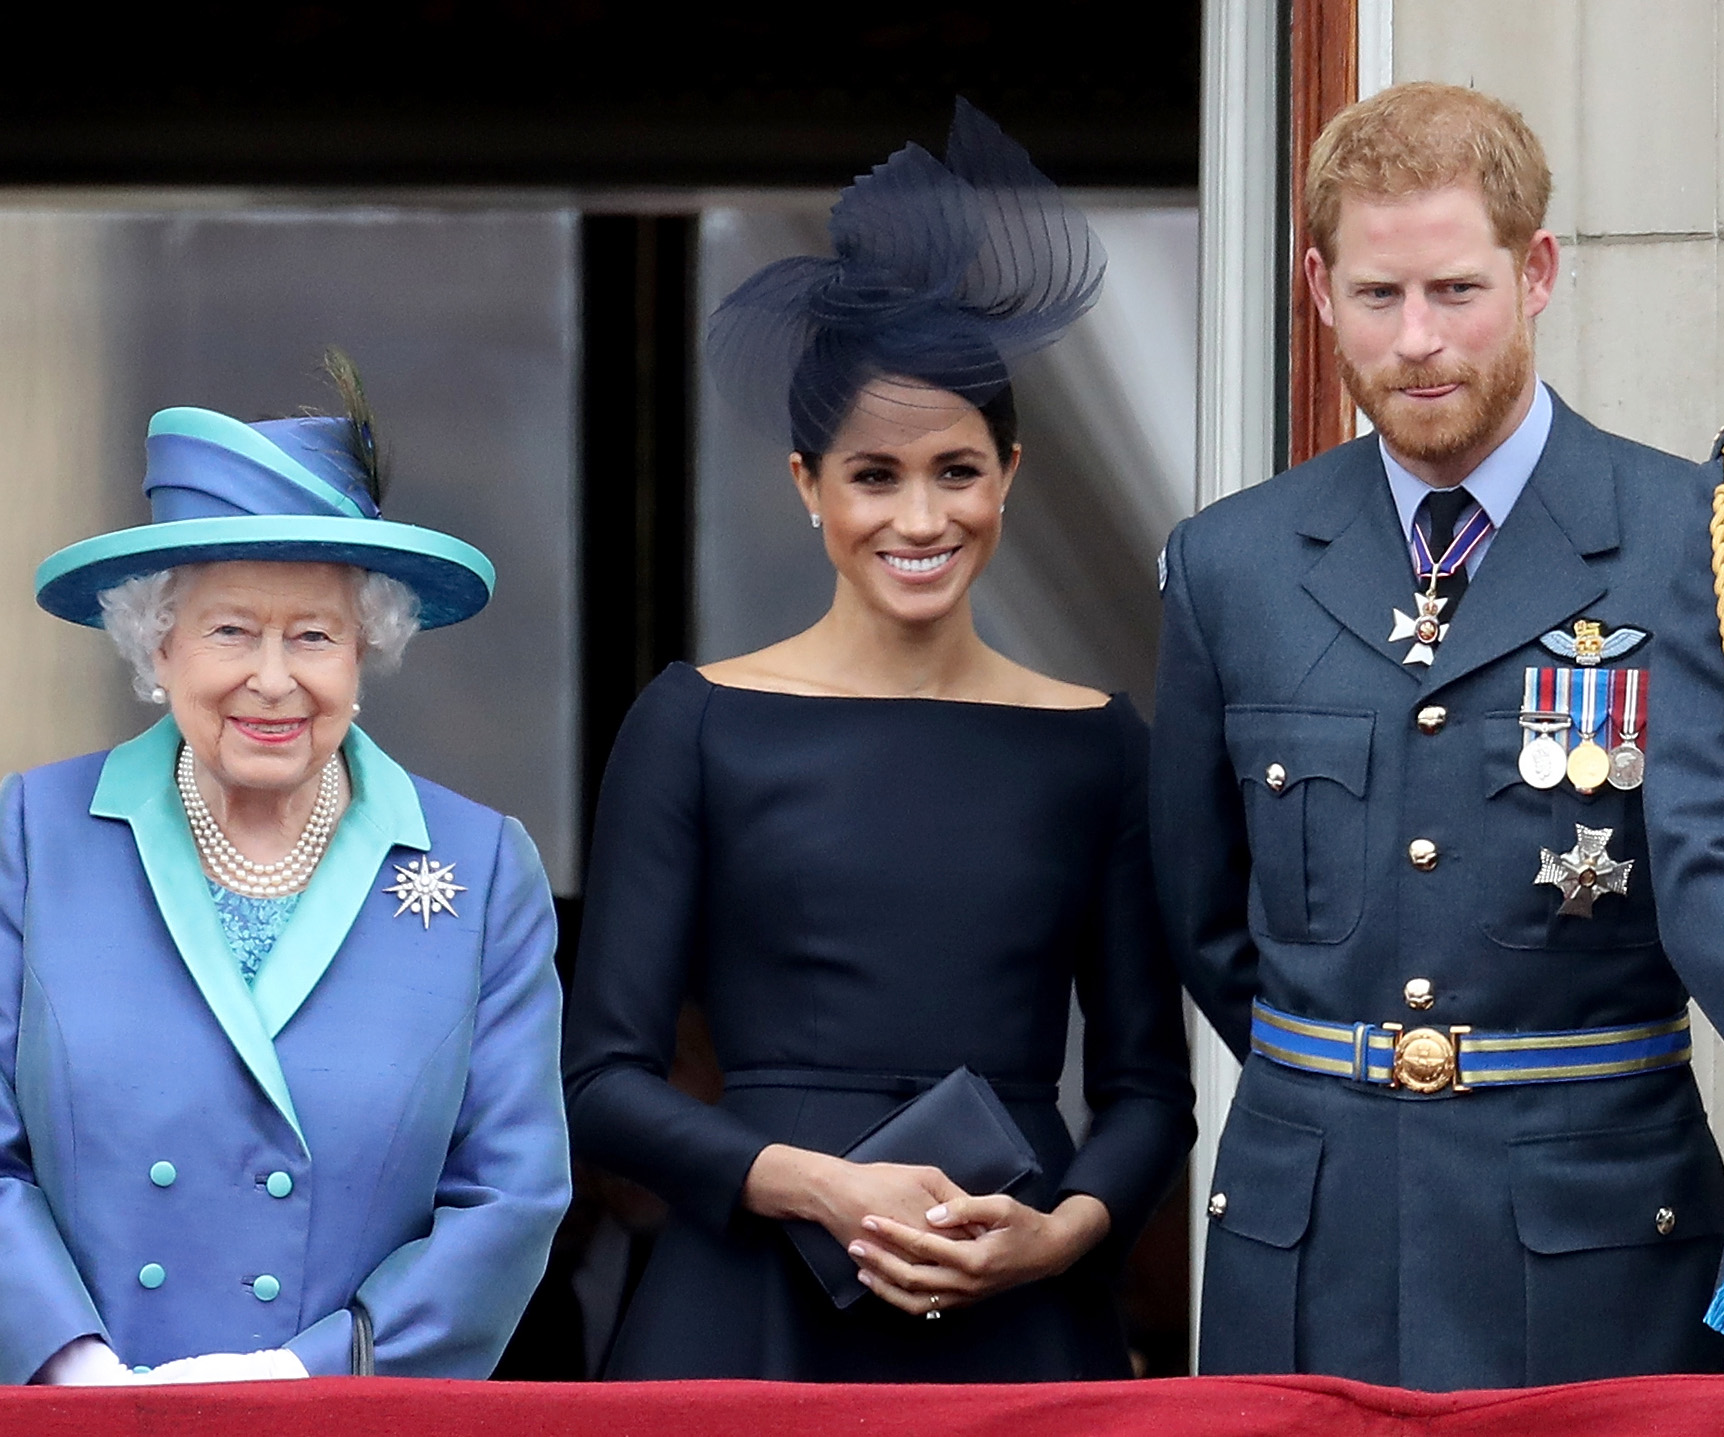 The Queen’s priceless housewarming gift to Harry and Meghan